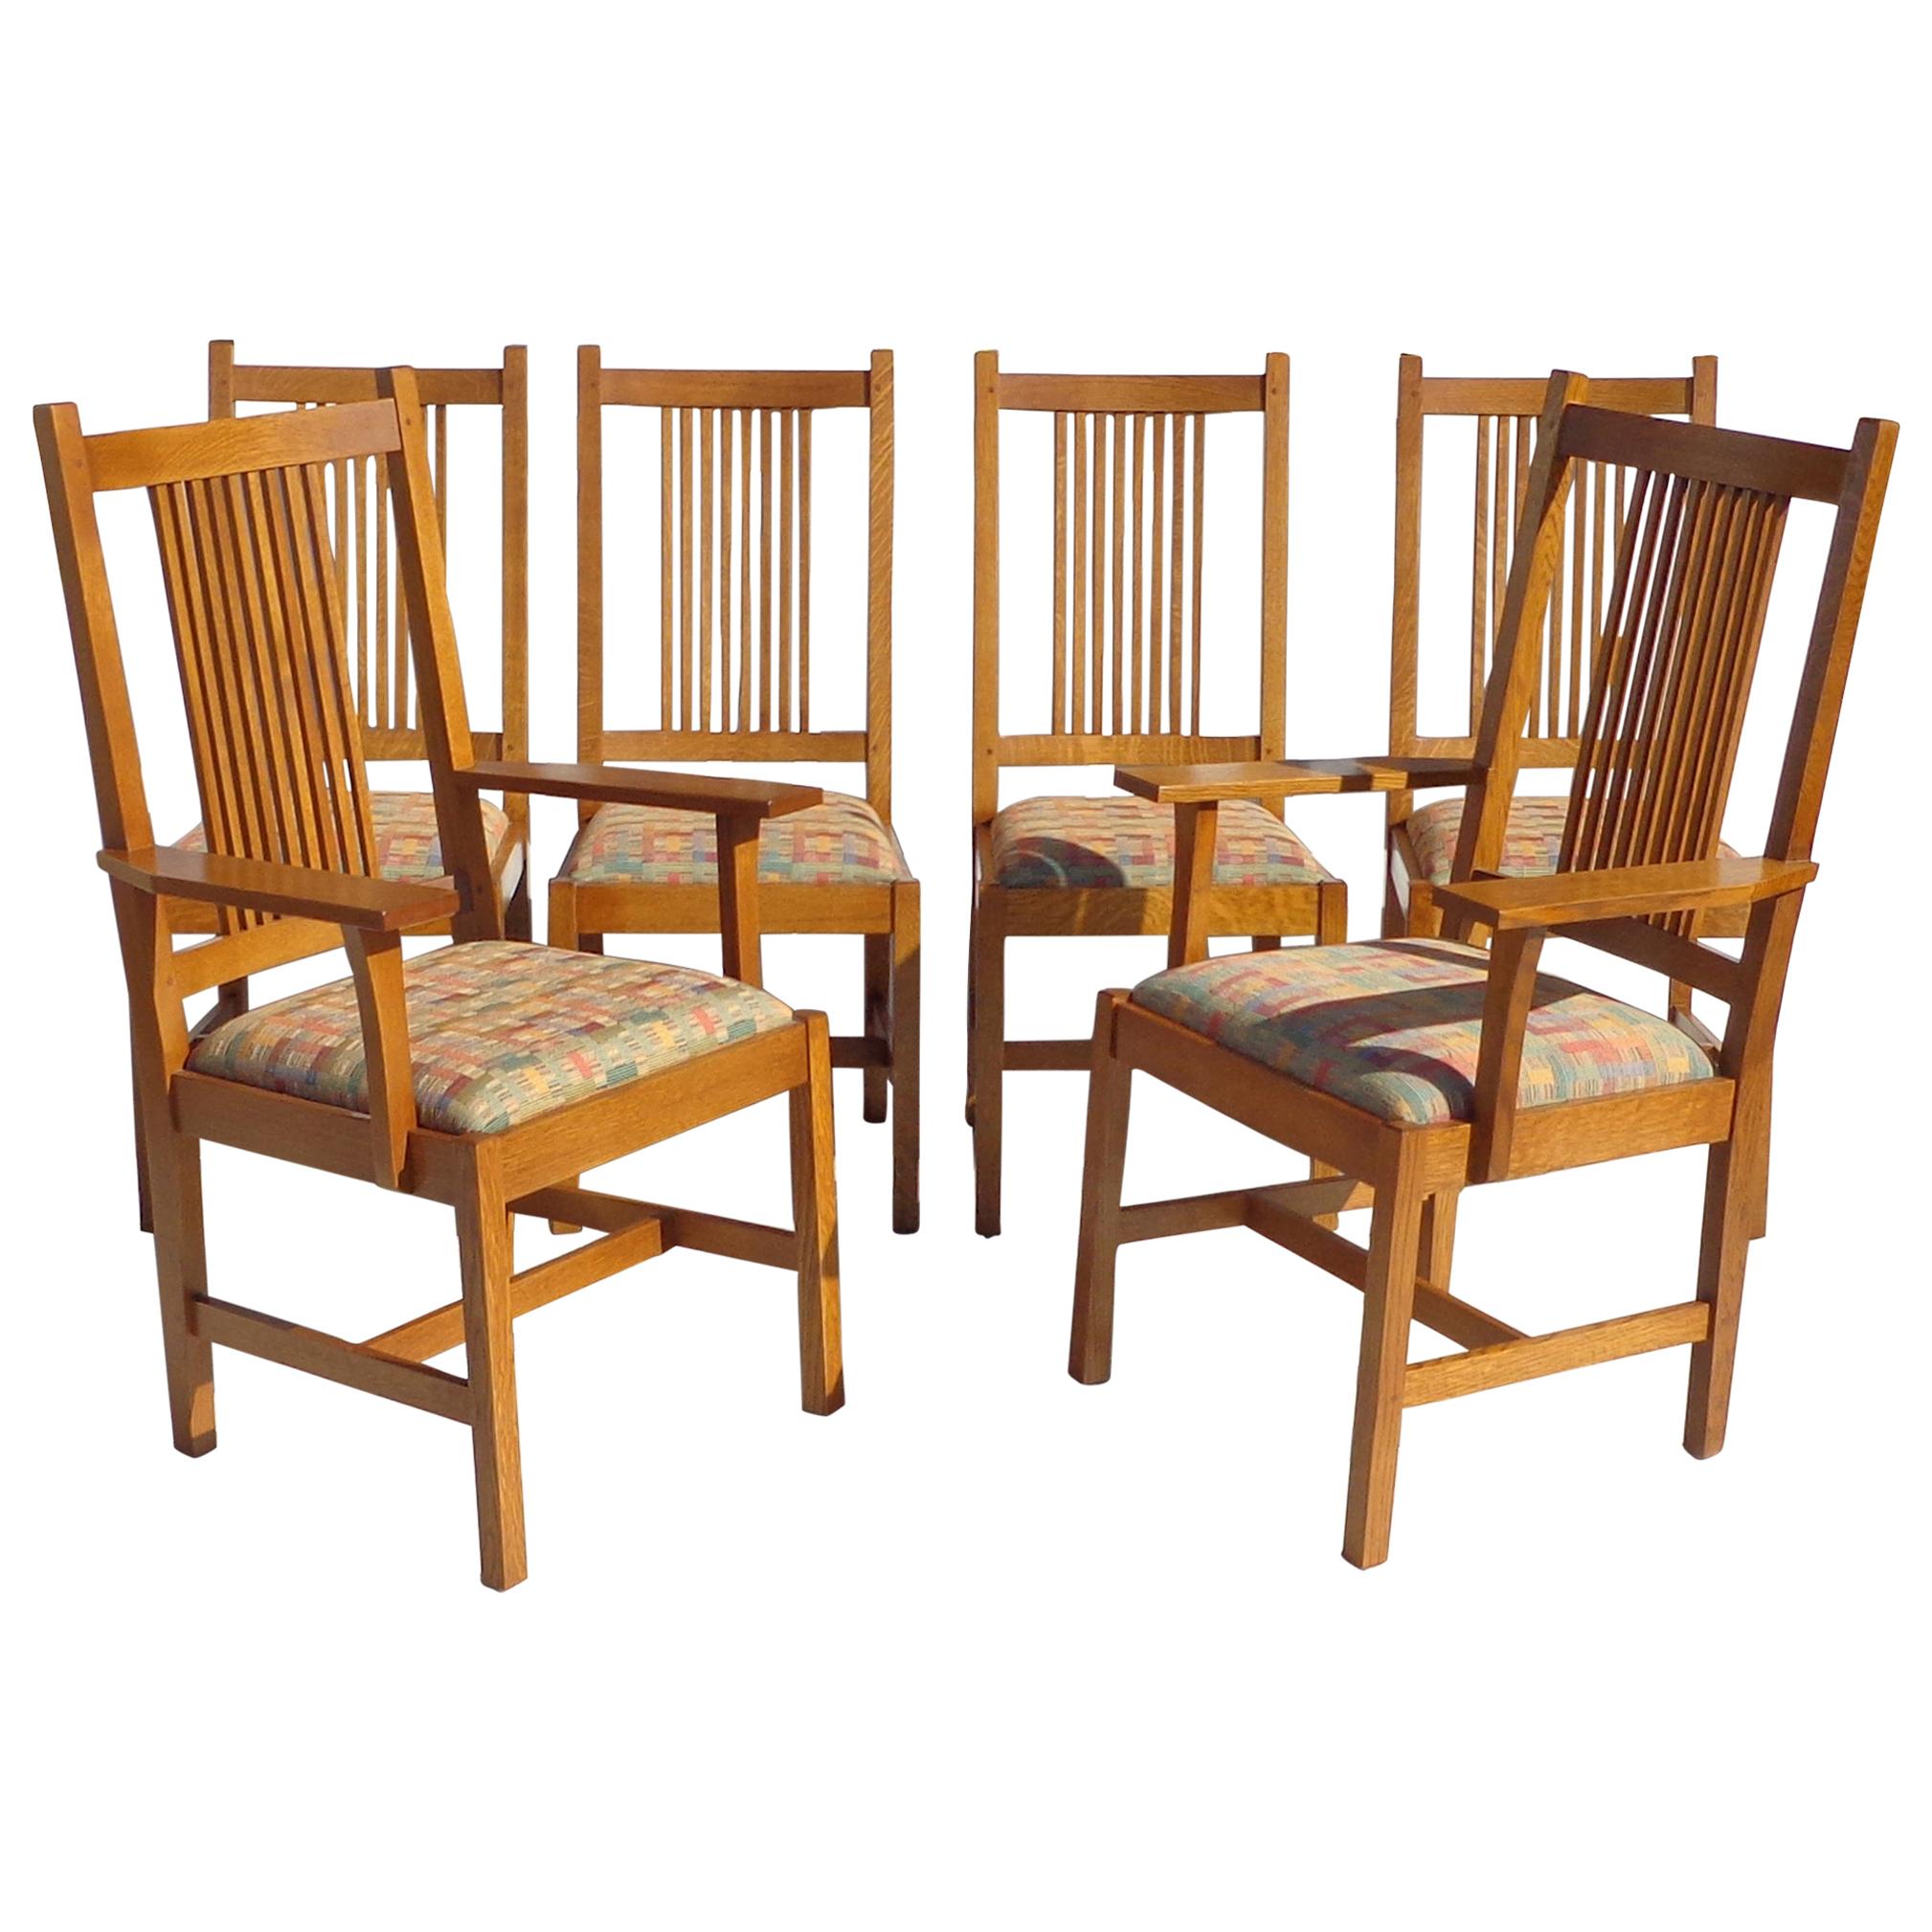 Set of 6 Stickley Spindle Mission Collection Dining Chairs